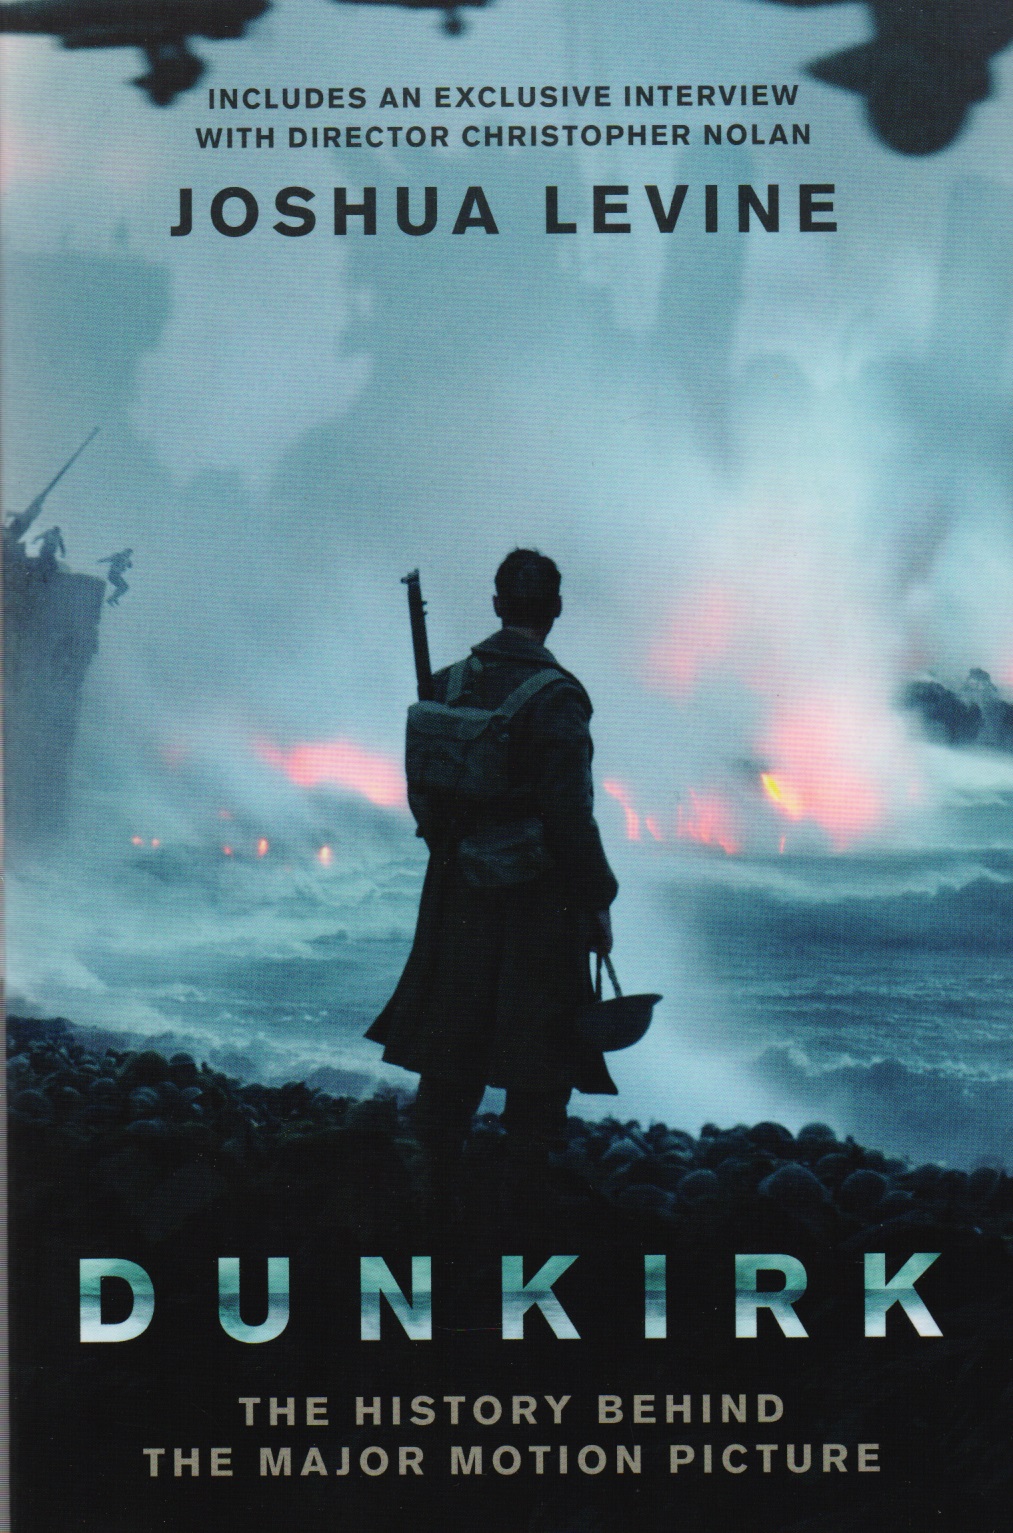 Dunkirk (м) Levine ost juno music from and inspired by the motion picture neon green vinyl lp конверты внутренние coex для грампластинок 12 25шт набор